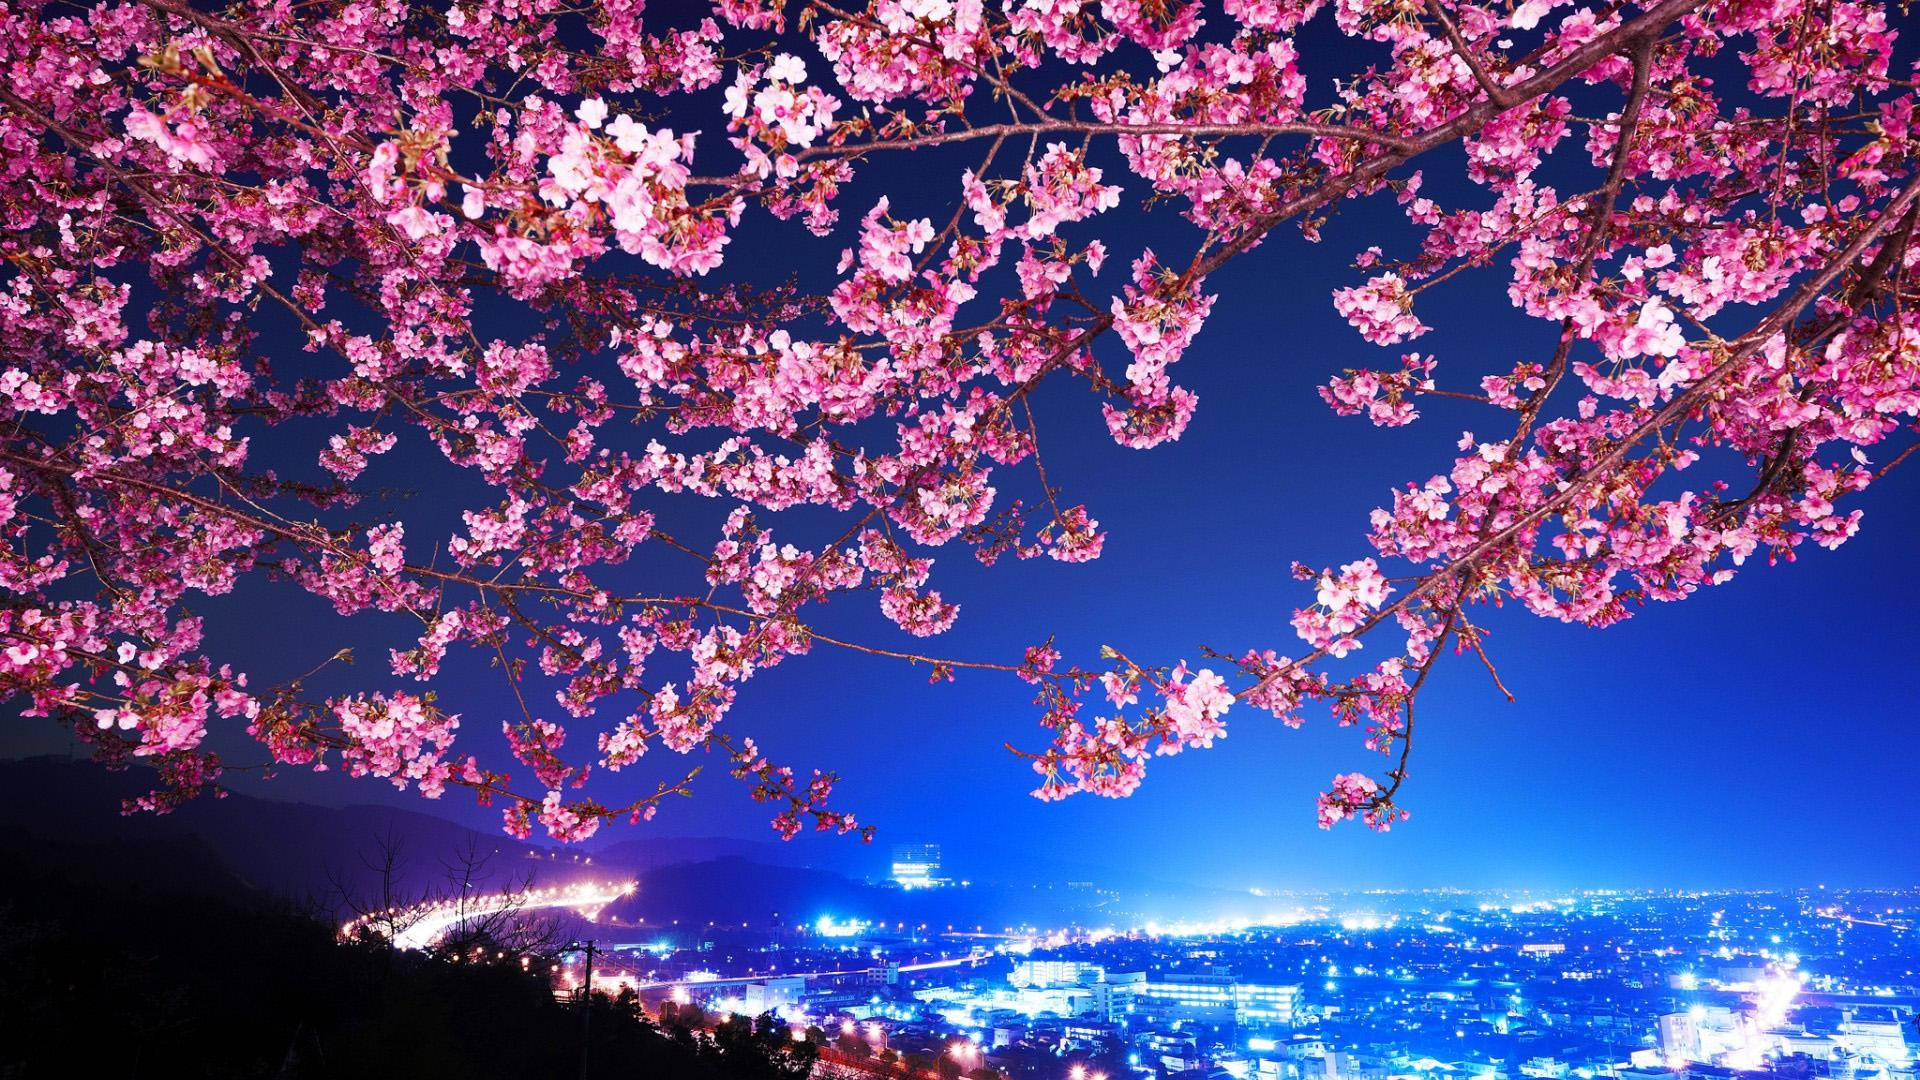 A tranquil blossom in the garden of Japan Wallpaper